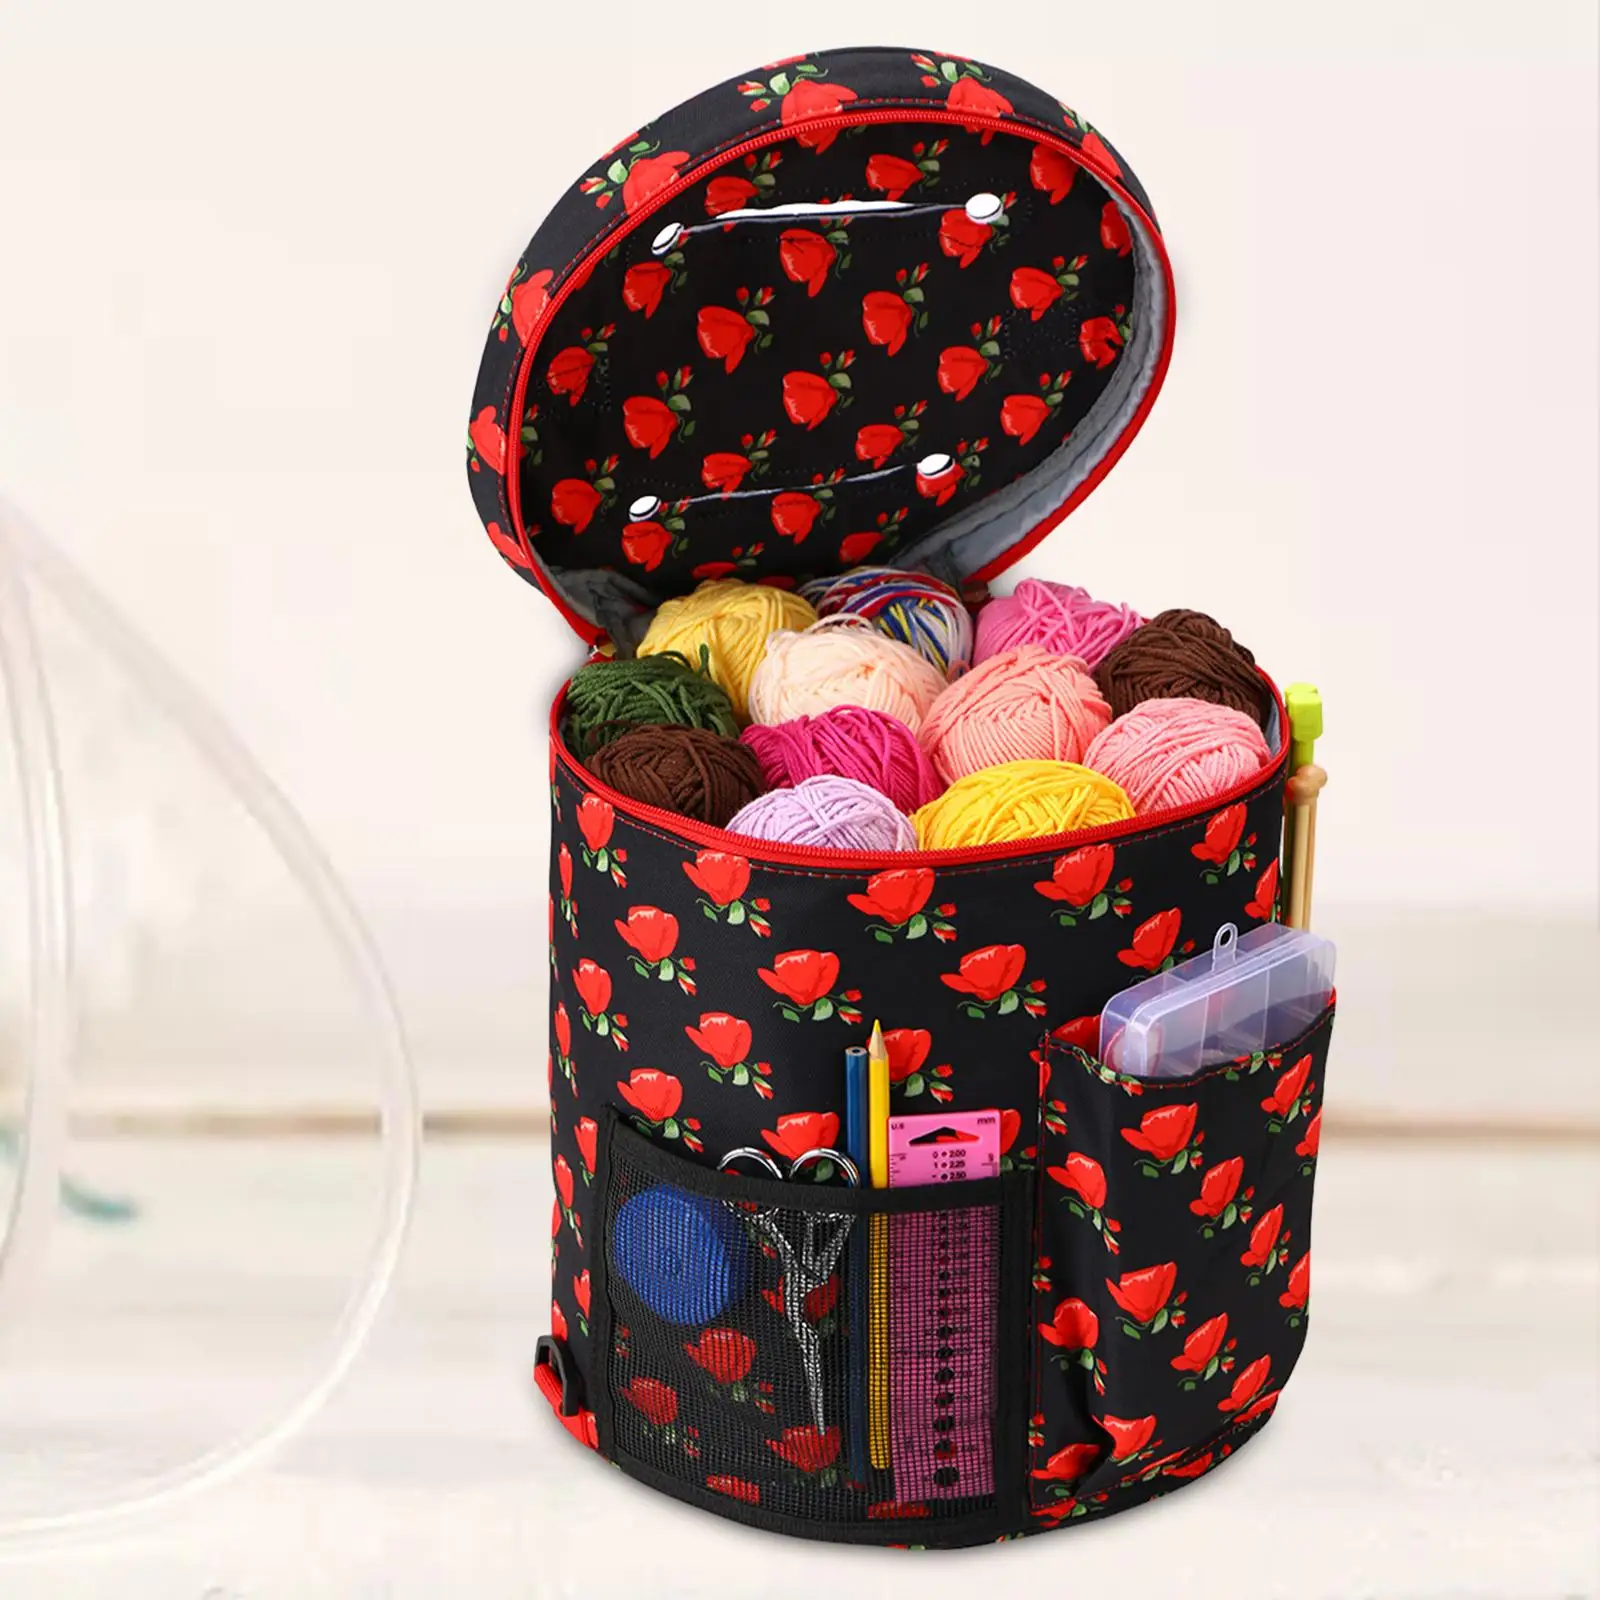 Yarn Storage Case with Shoulder Strap Fits A Ball of Yarn Knitting Bag Travel Large Crochet Bag for Knitting Needles Accessories